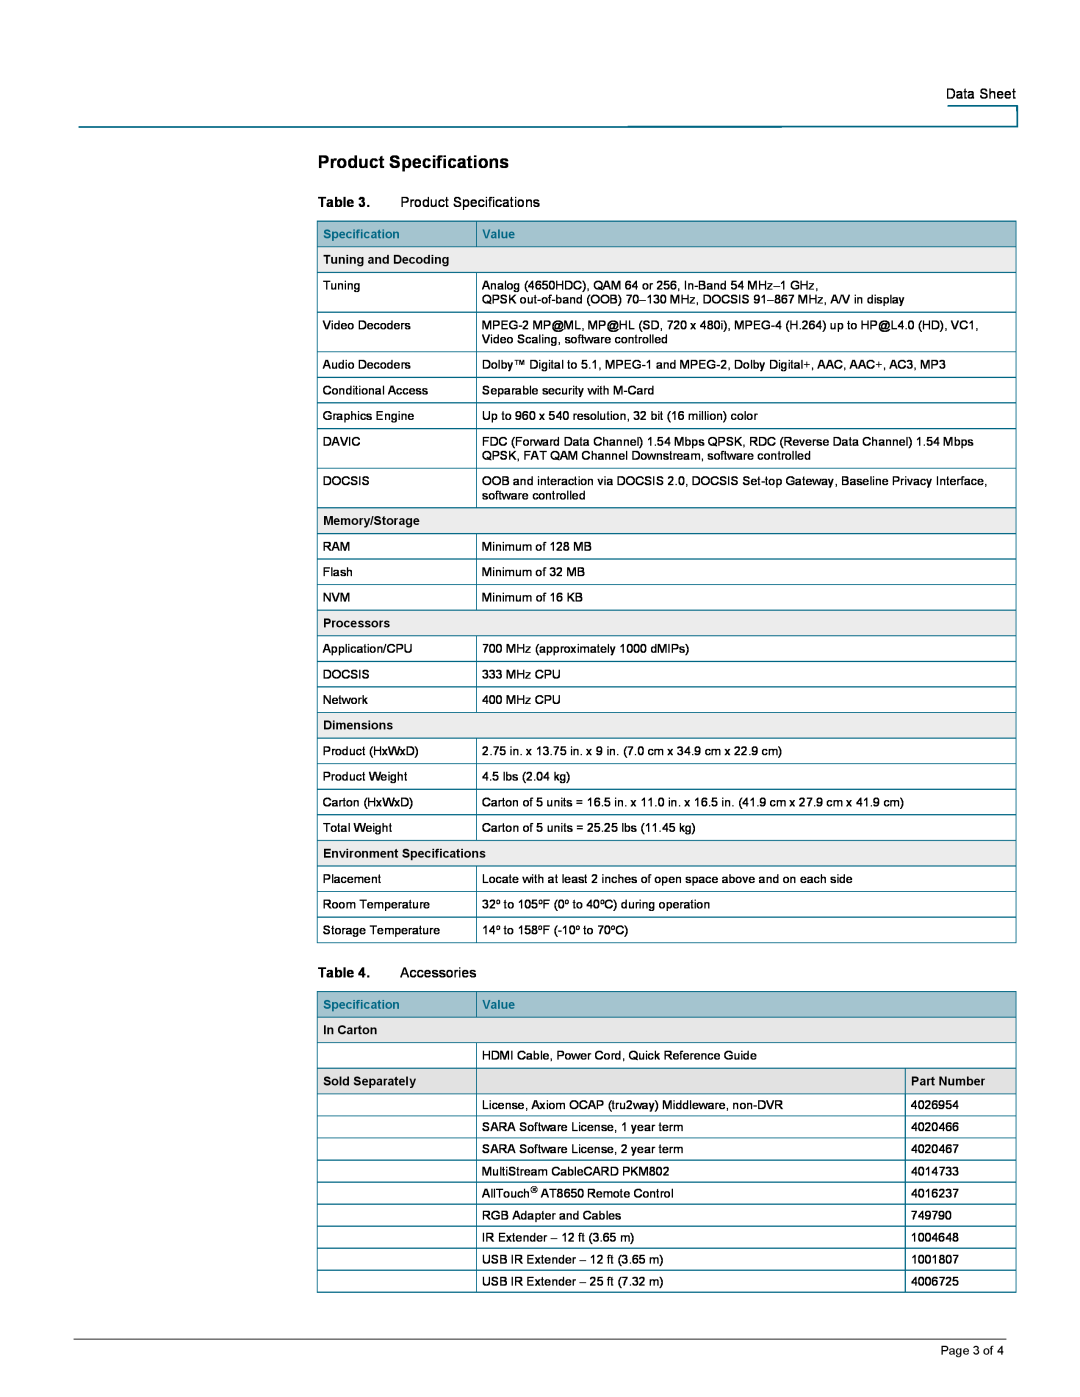 Cisco Systems 4640HDC, 4650HDC Product Specifications, Value, Tuning and Decoding, Memory/Storage, Processors, Dimensions 